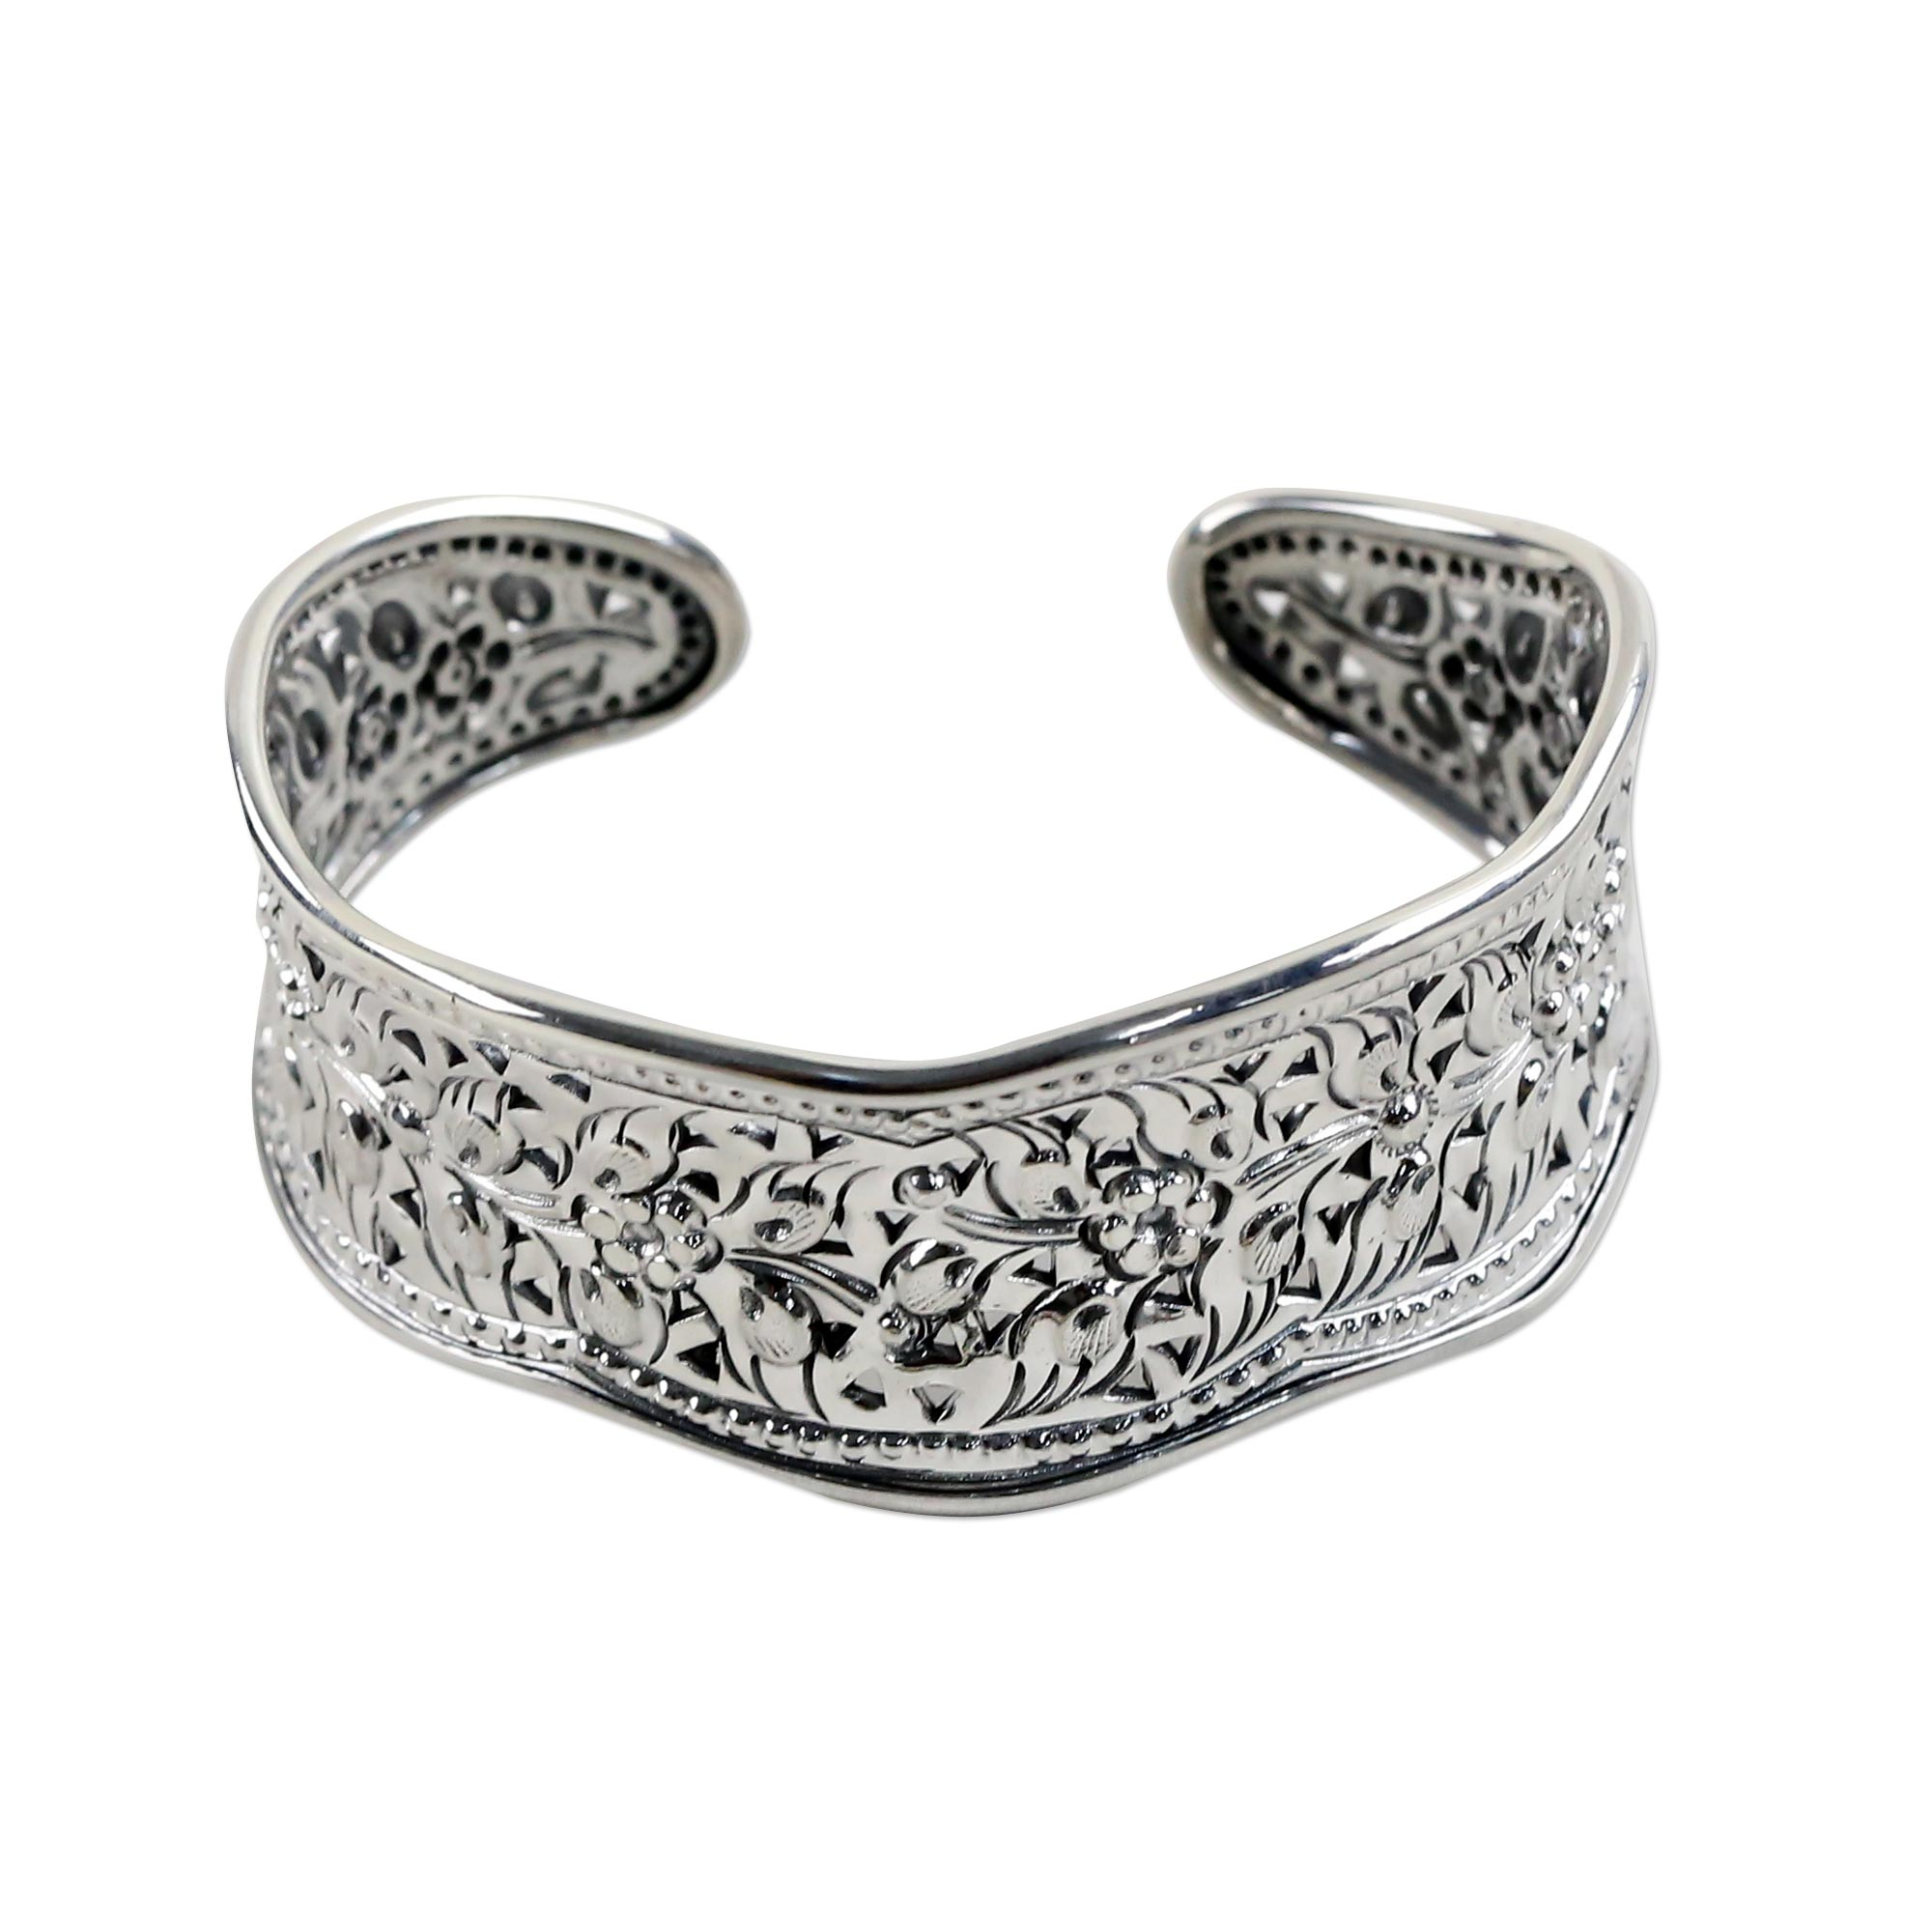 Artisan Crafted Thai Floral Sterling Silver Cuff Bracelet - Mae Ping ...